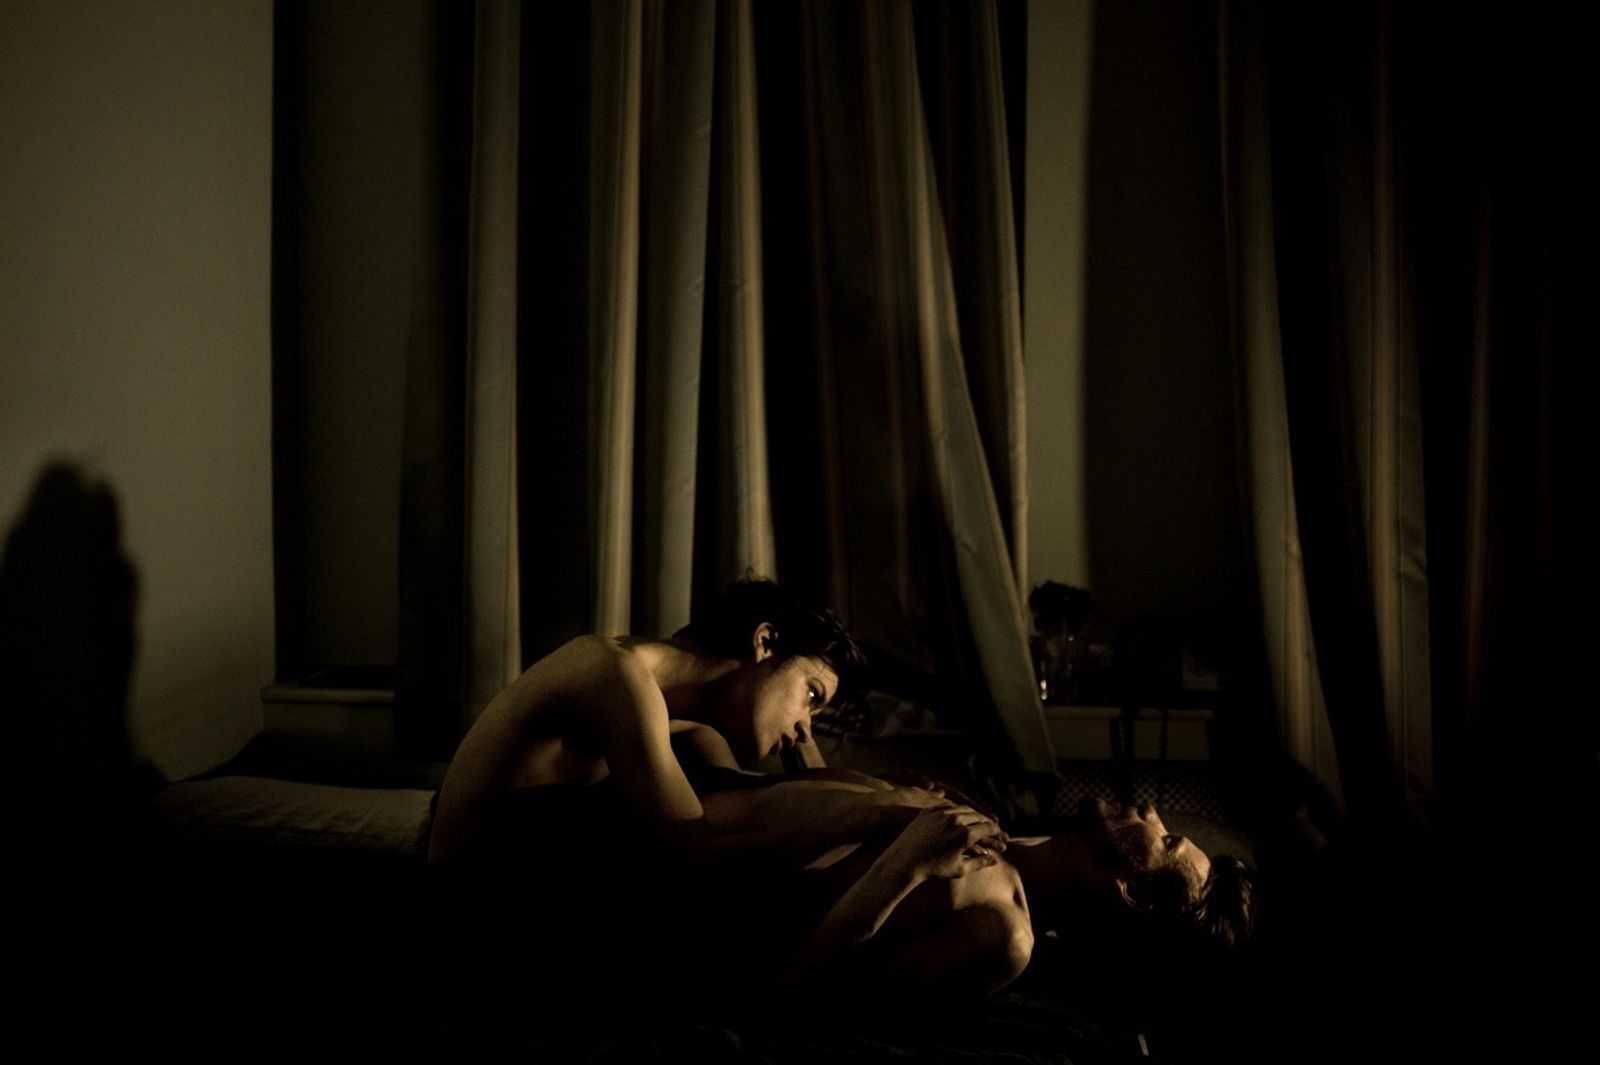 From the series Homophobia in Russia by Mads Nissen